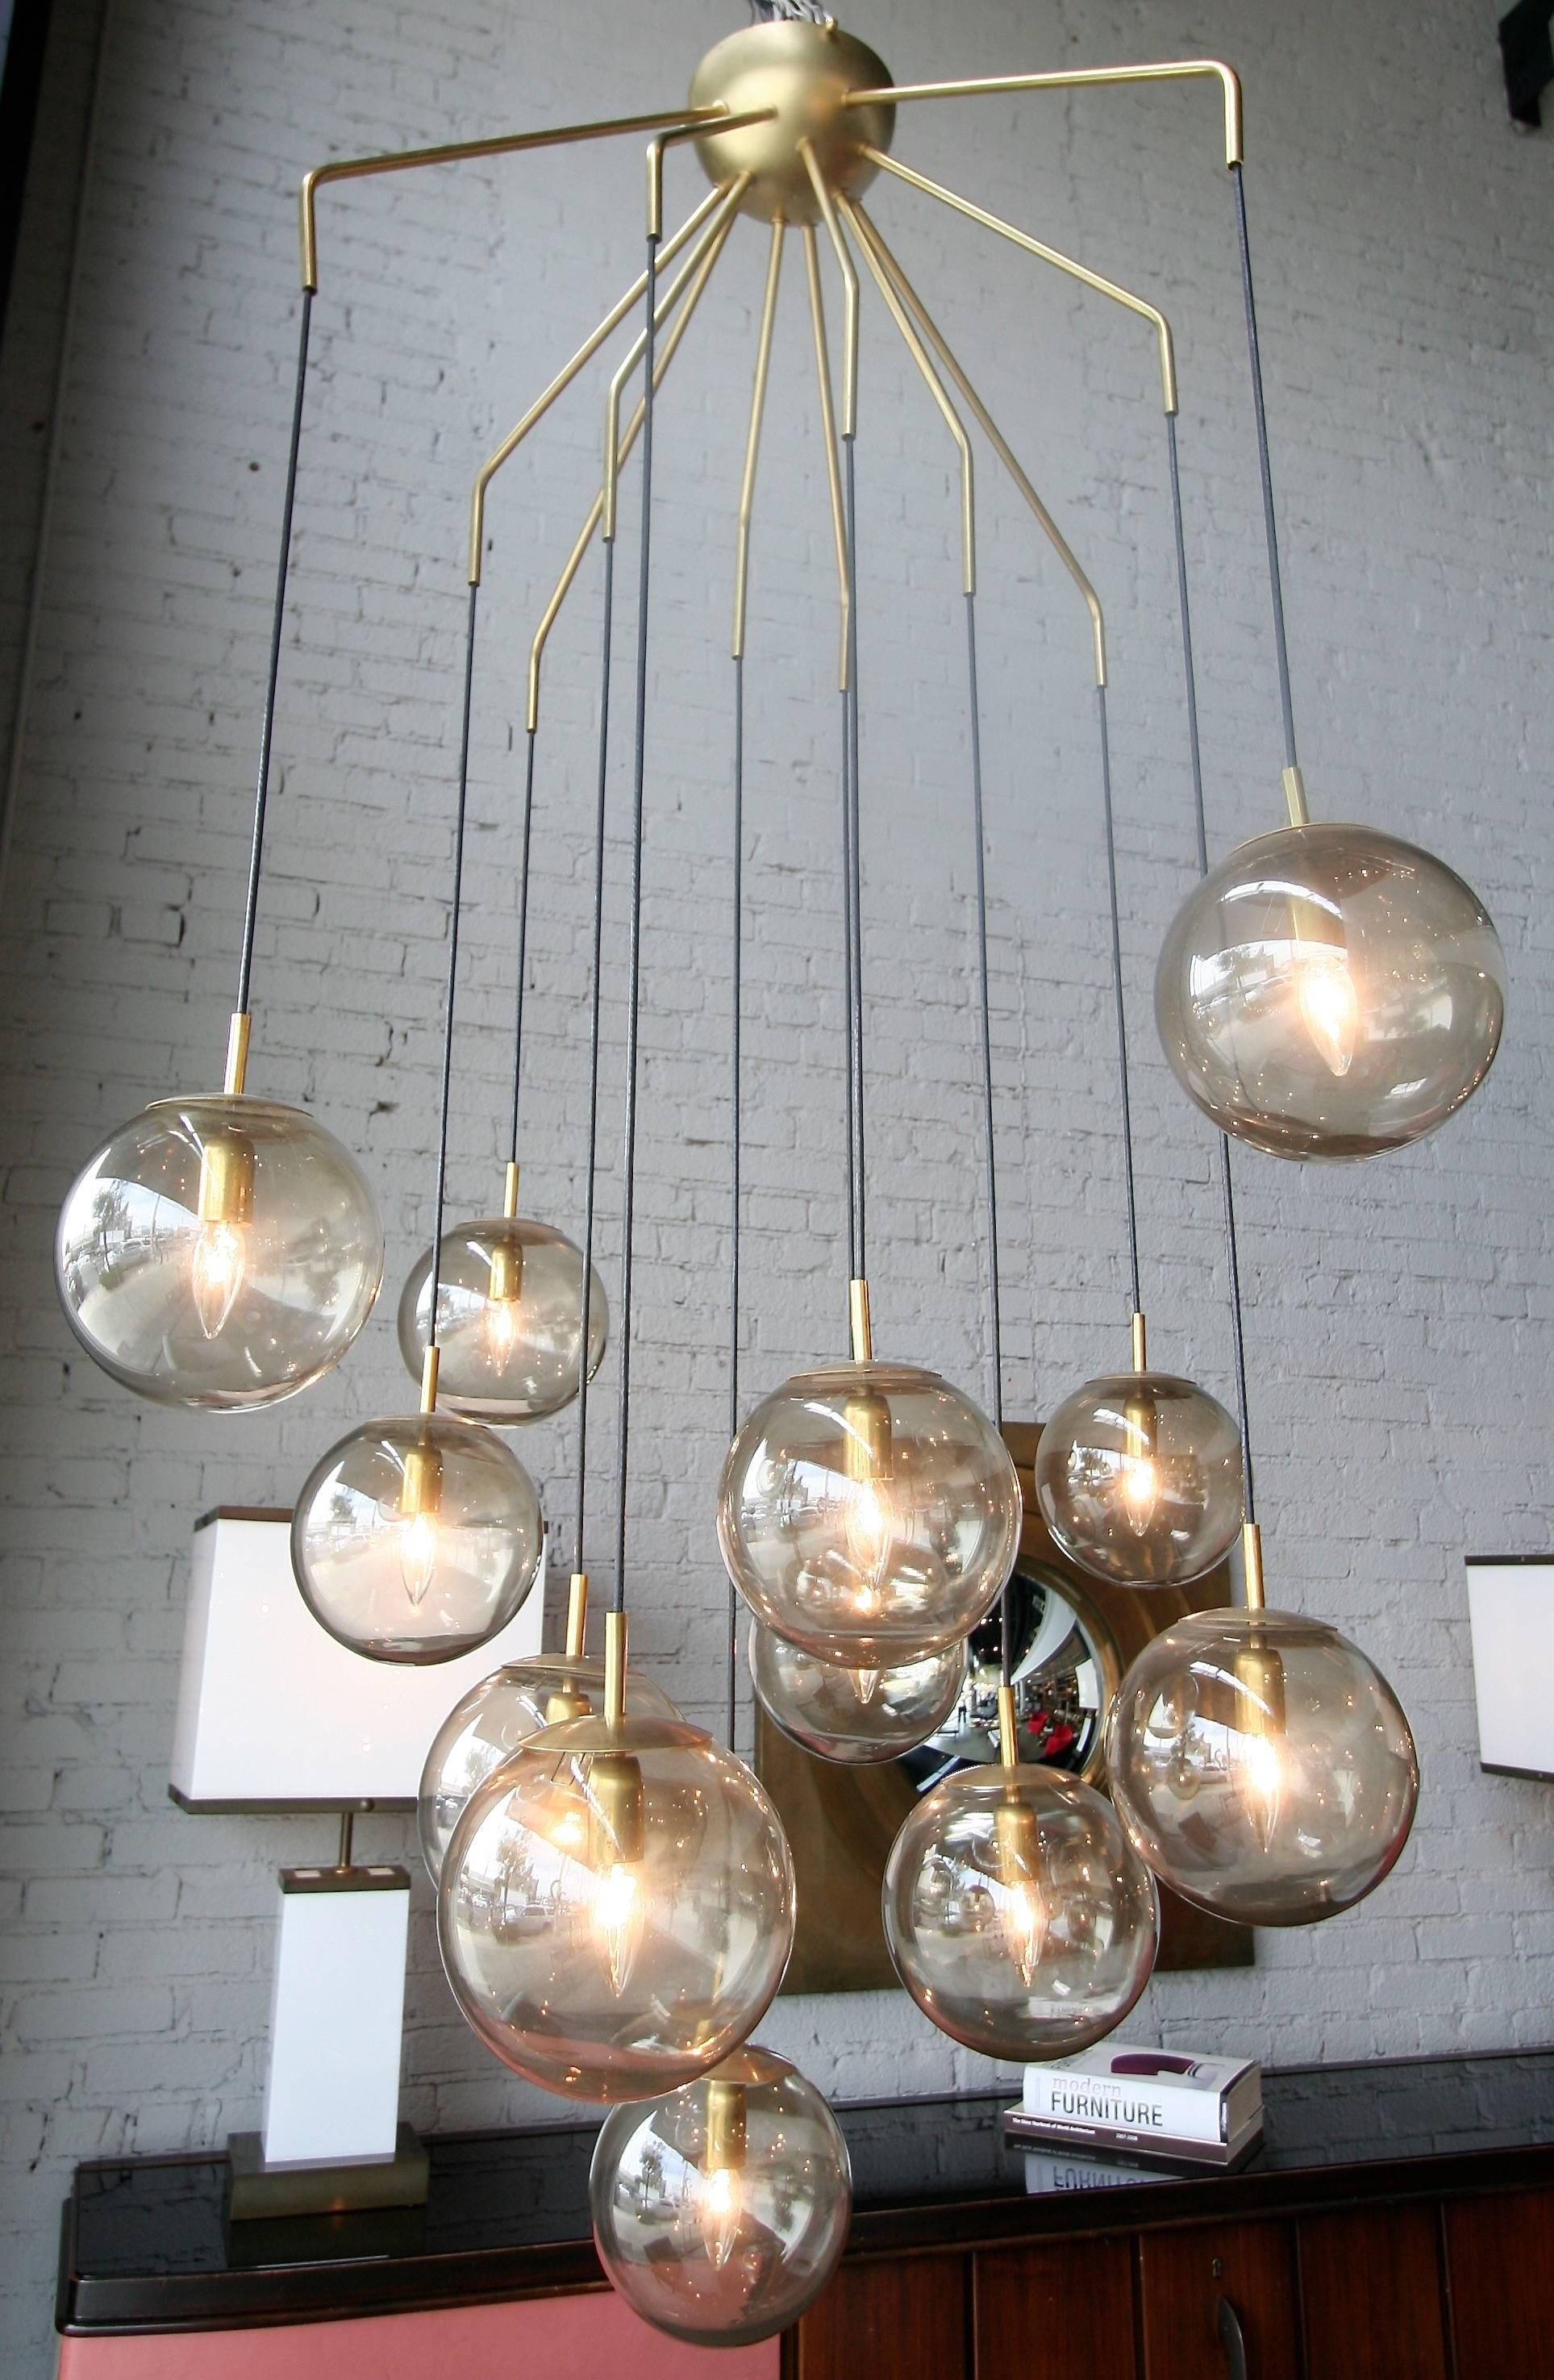 Murano 1970s chandelier with 12 cascading smoked glass balls.